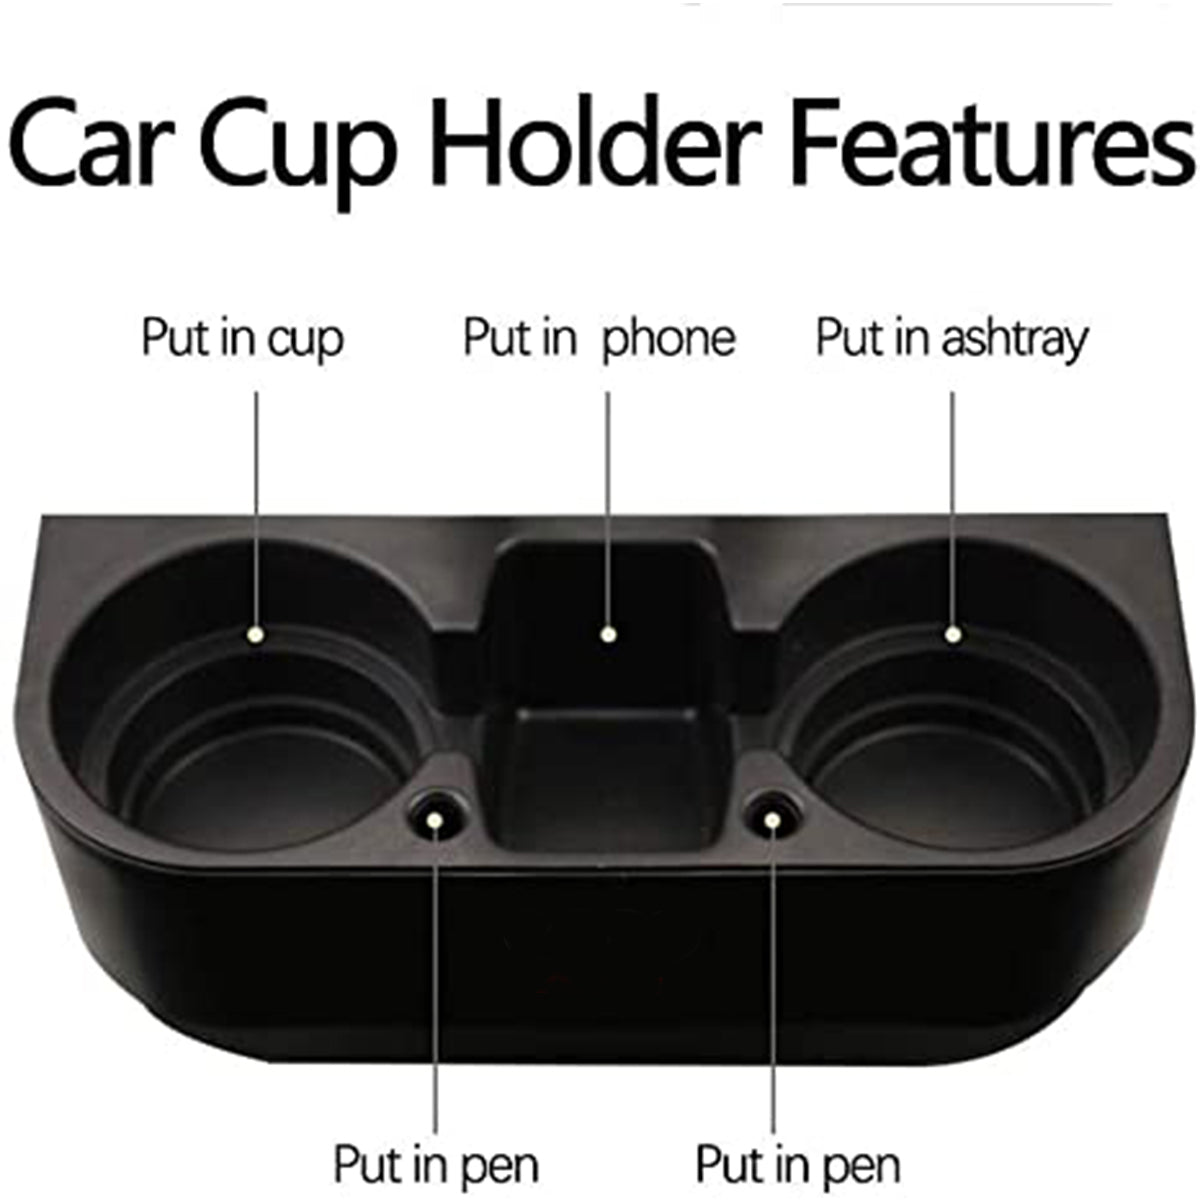 Delicate Leather Cup Holder Portable Multifunction Vehicle Seat Cup Cell Phone Drinks Holder Box Car Interior Organizer, Custom For Your Cars, Car Accessories PE11995 - Delicate Leather